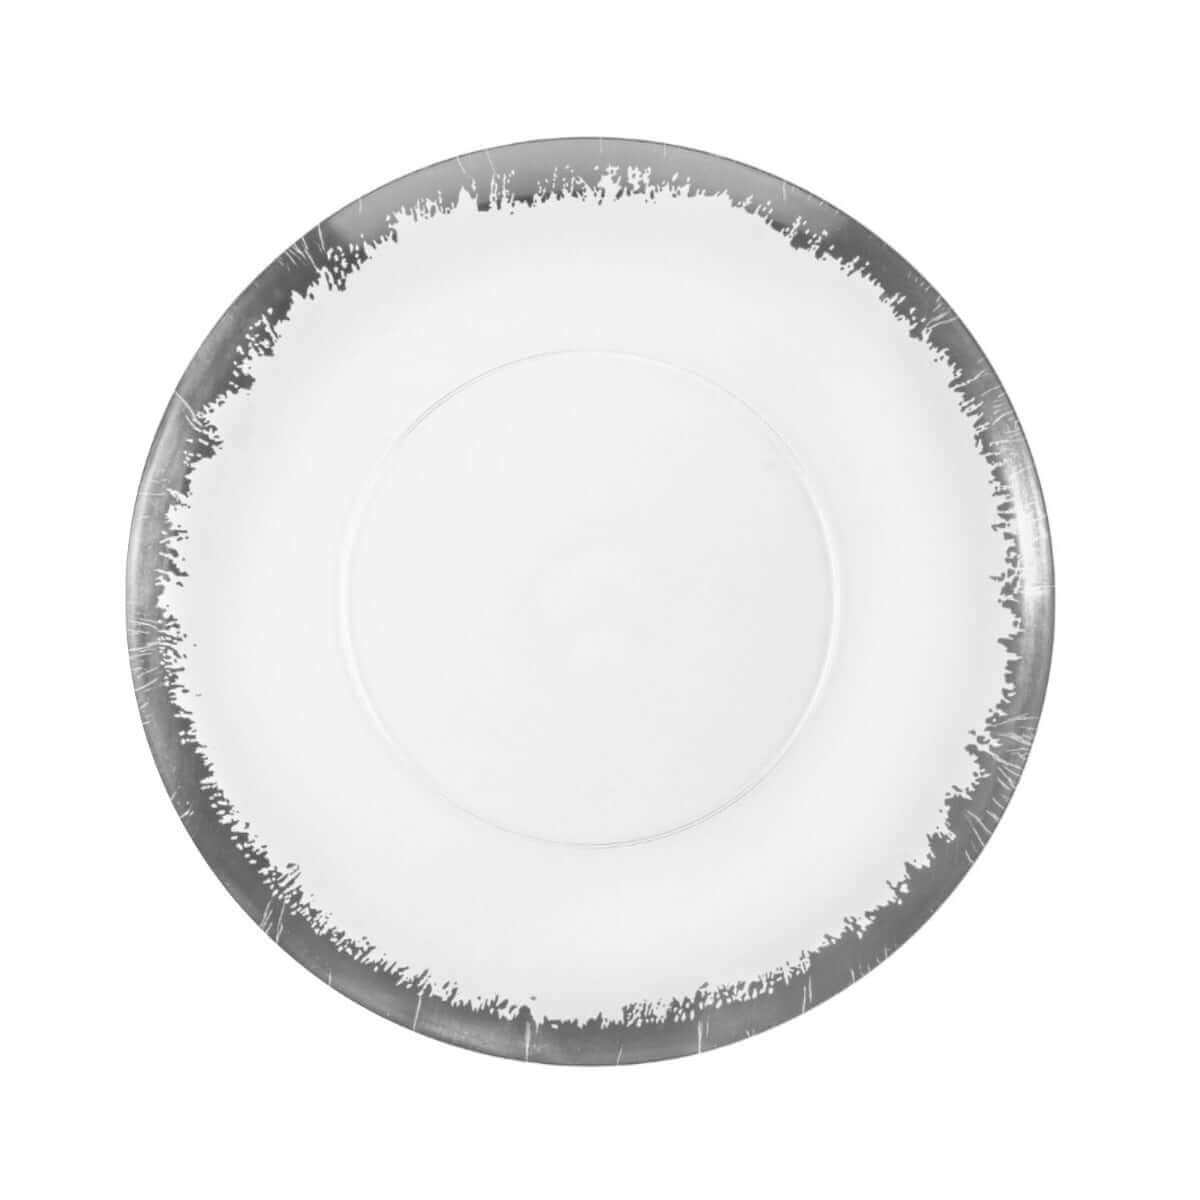 10" Silver Scratched Design Plastic Plates (40 Count) - Yom Tov Settings